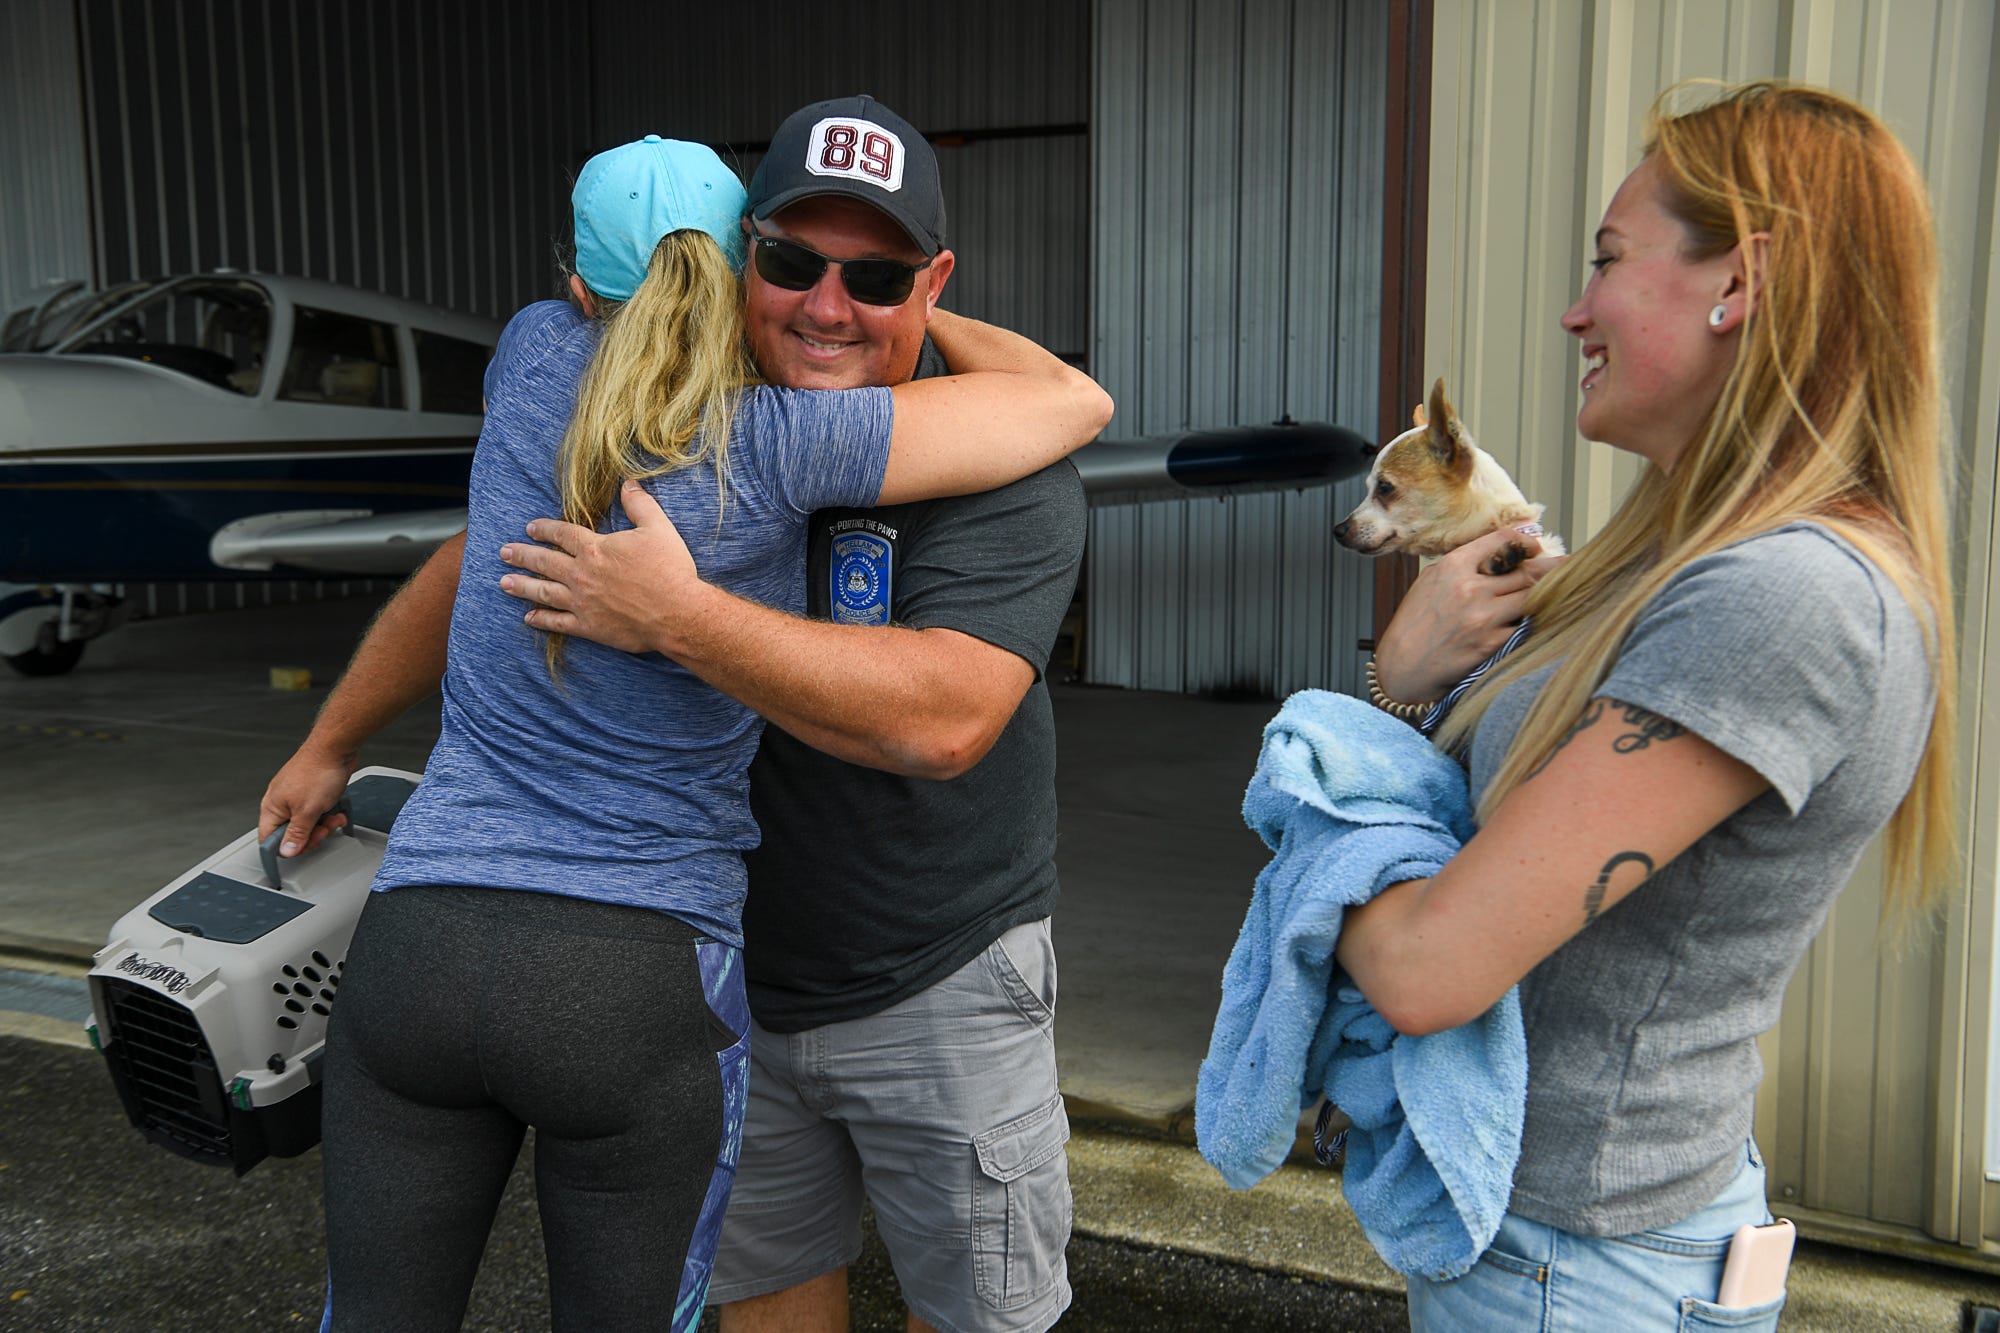 Ame Kessler hugs volunteer pilot Matt Russ, a York Area United firefighter, after he flew four and a half hours round trip to bring Lucy home to her family, Thursday, September 10, 2020.
John A. Pavoncello photo